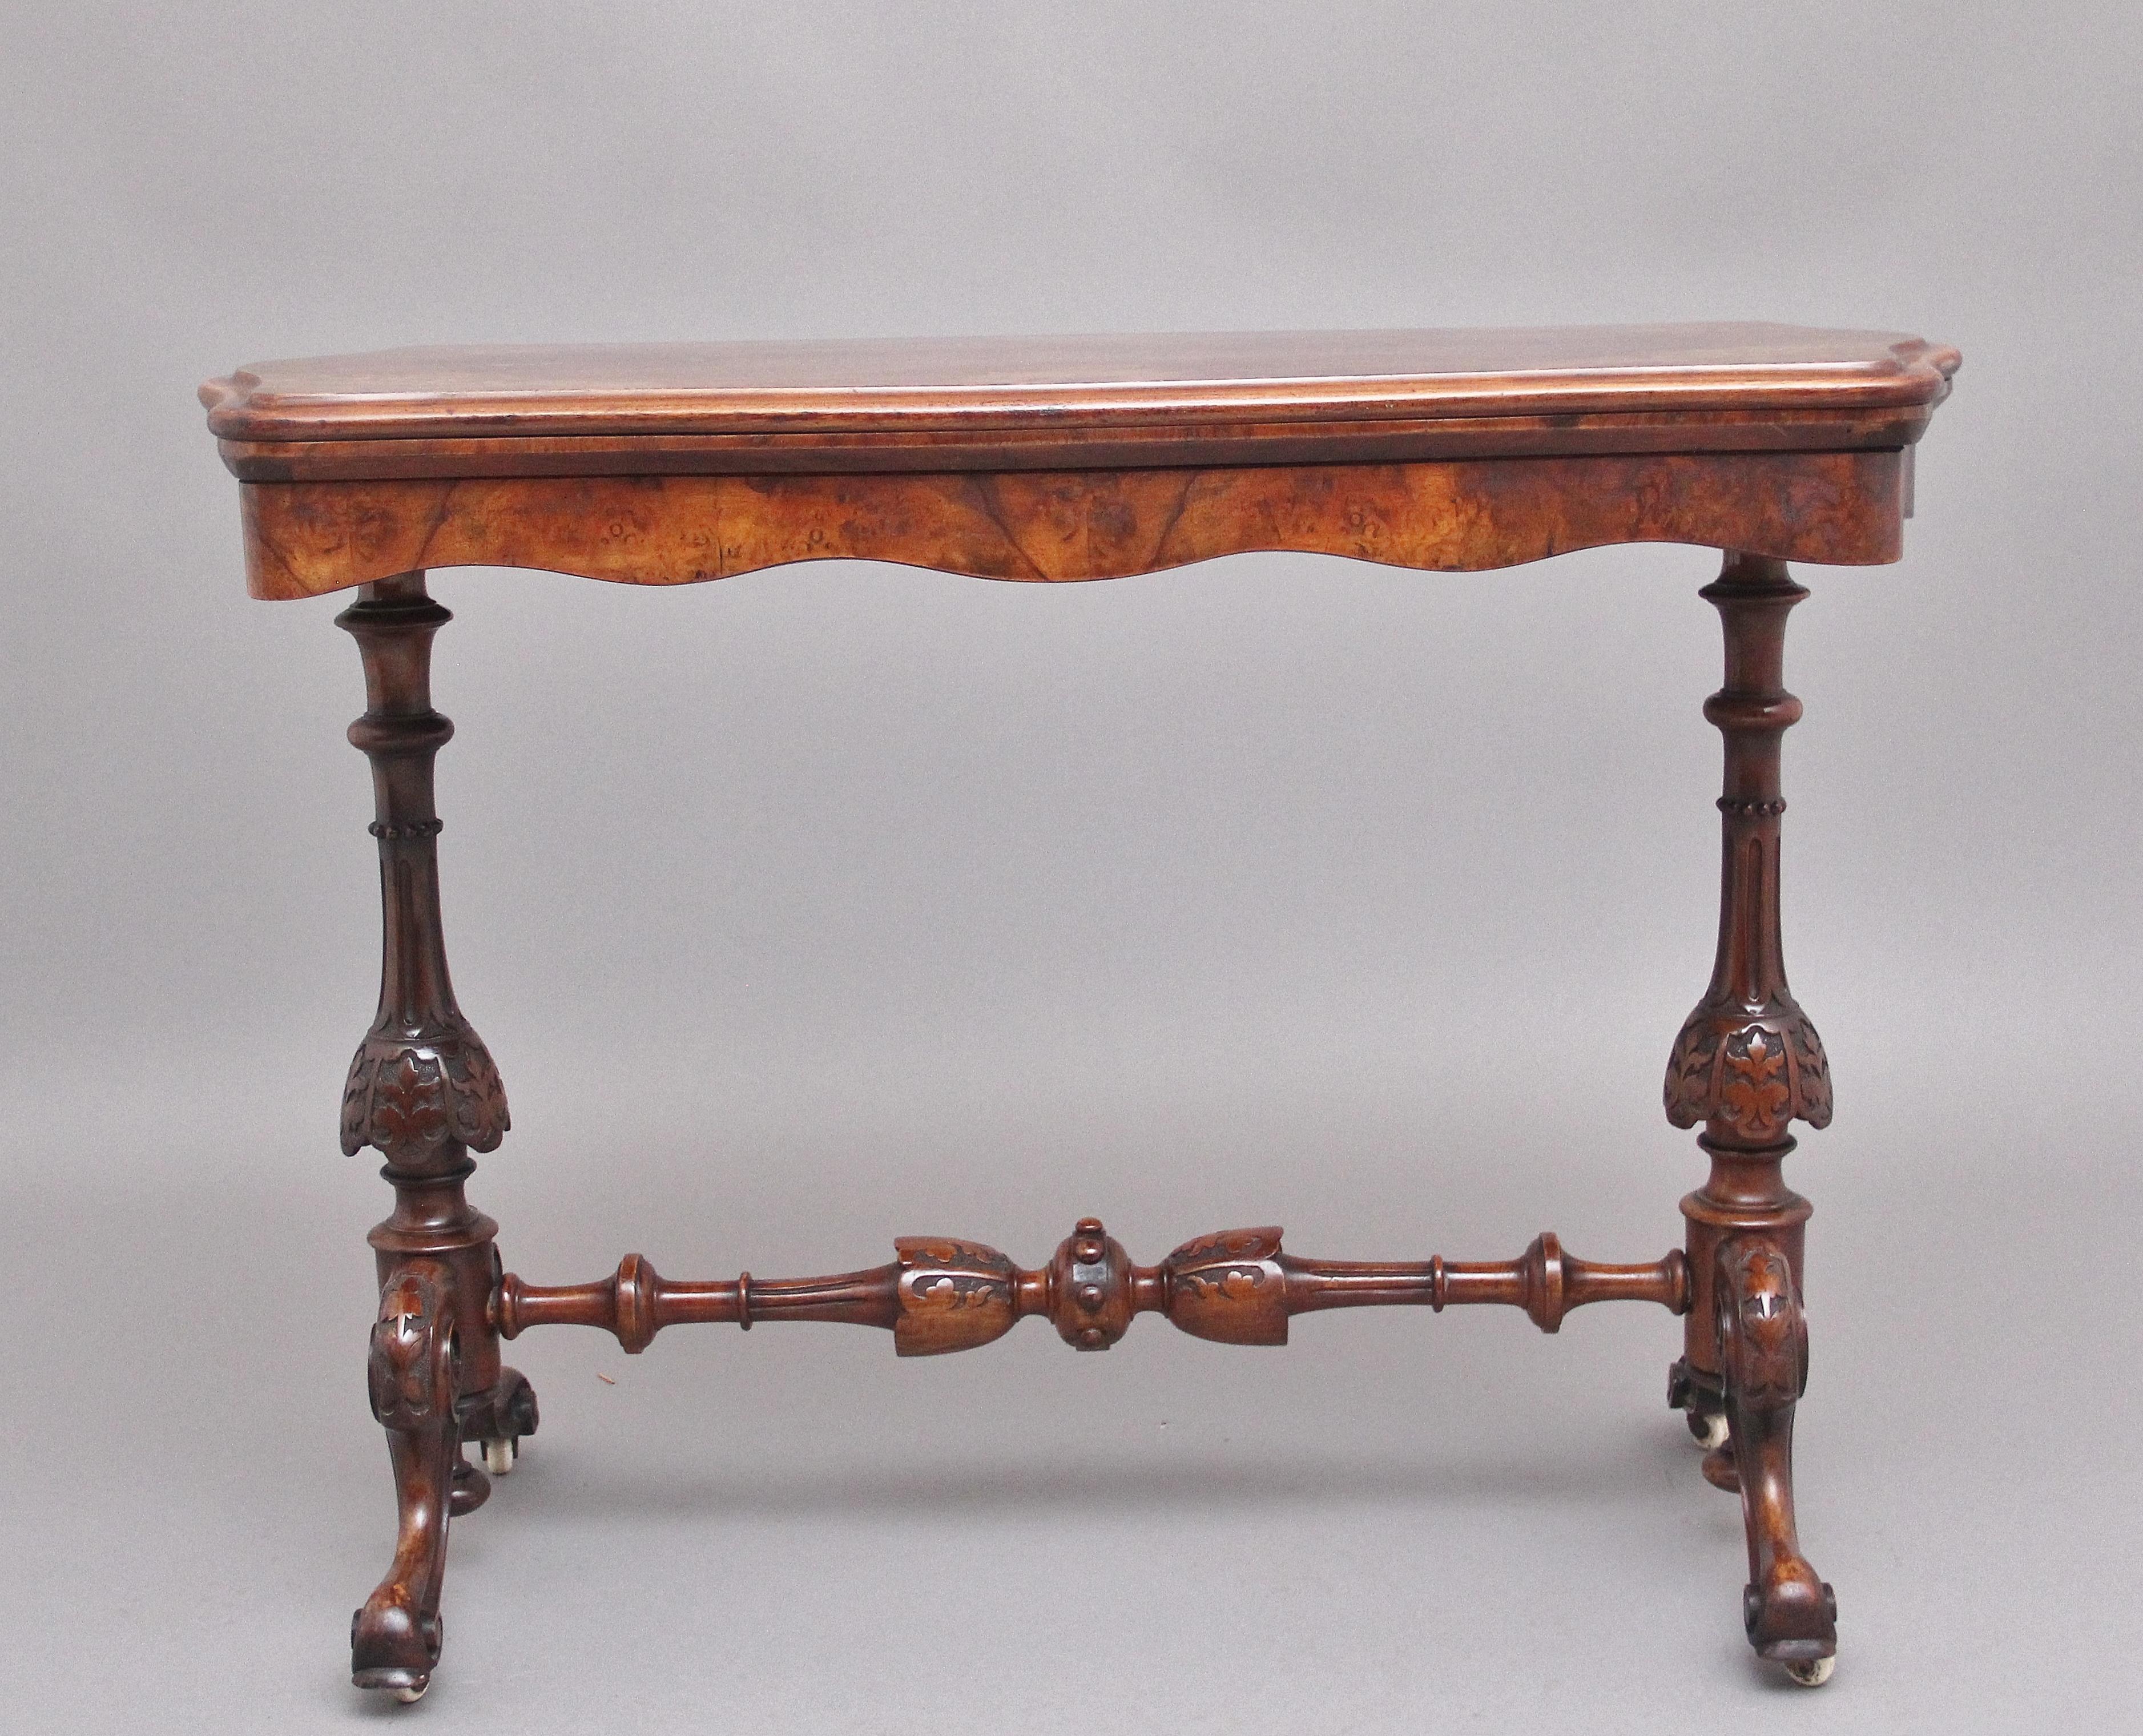 19th century burr walnut folding card / games table, having a nice figured top with a moulded edge and decorative floral inlay, the hinged folding top which open out to reveal a green baize lined playing surface and compartment space, supported on